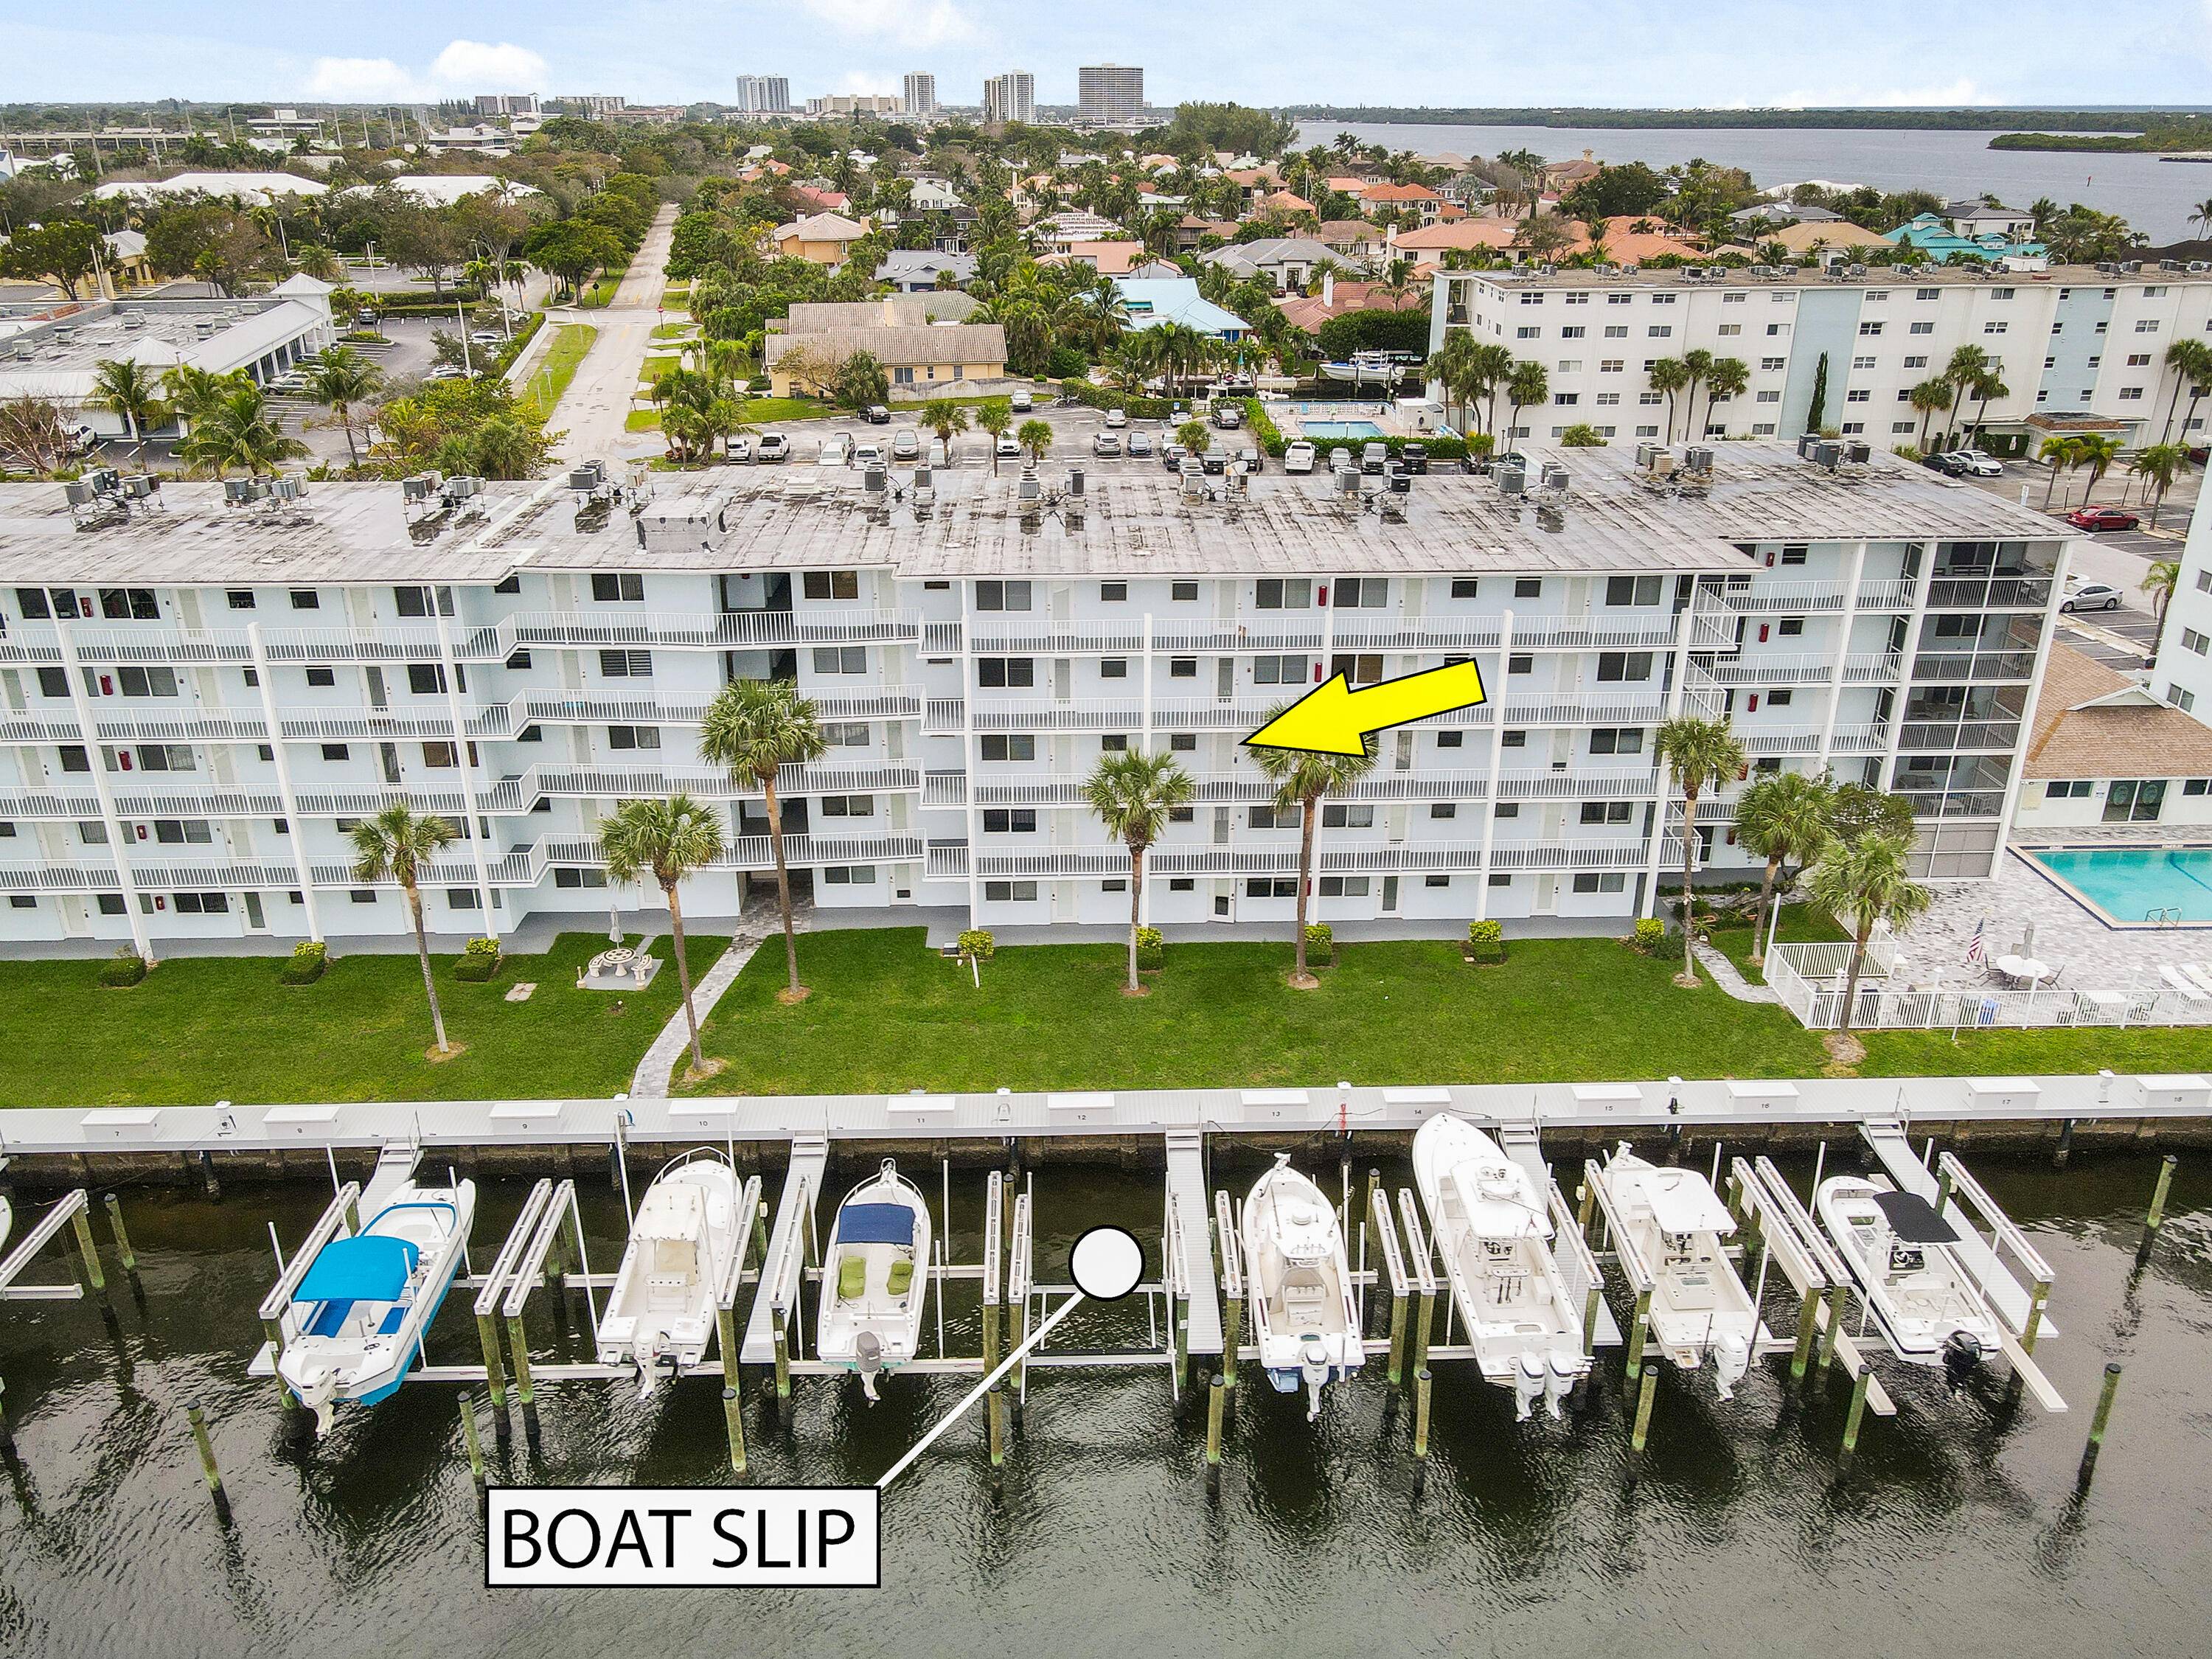 Attention Boaters ! ! Don't miss this opportunity to purchase a rarely available charming 1 bedroom 1 bathroom waterfront condo including a 40 x 16 deeded boat slip with a ...